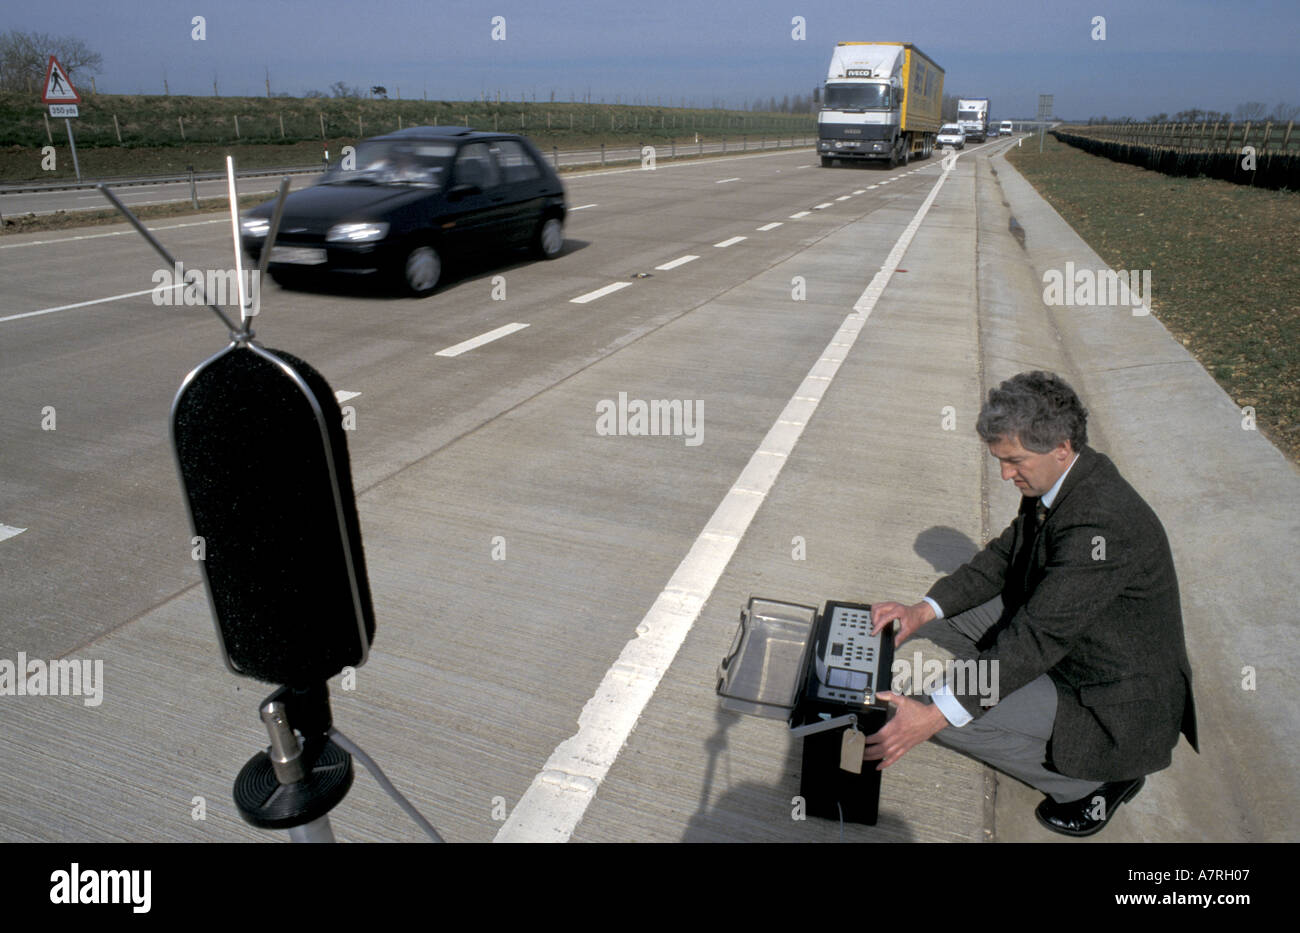 Environmental health officer measures sound decibel level on road bypass Cirencester England Stock Photo